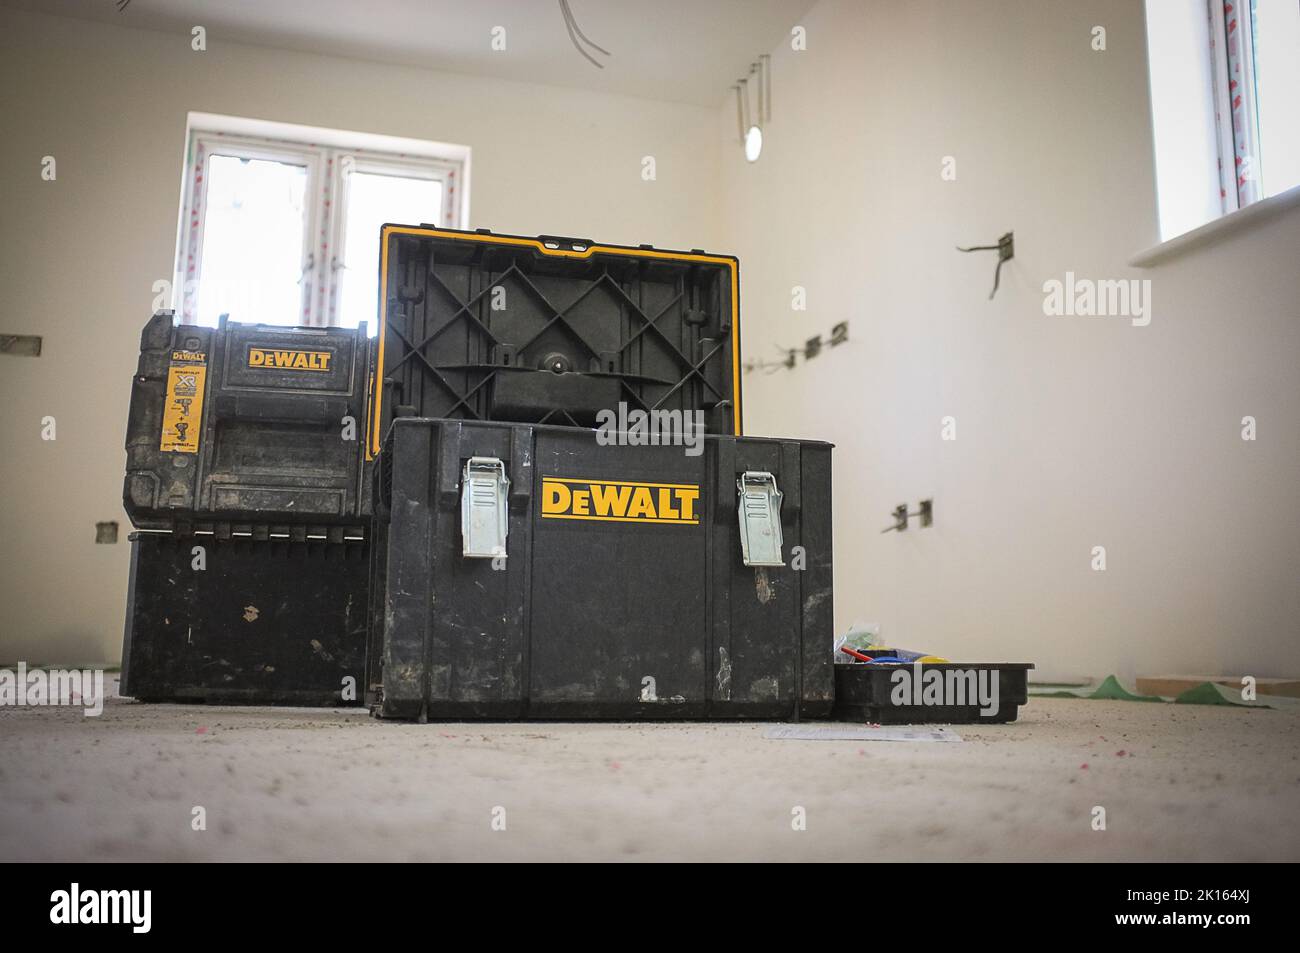 A NEW BUILD, BUILDING SITE WITH DEWALT TOOL STORAGE BOXES IN MIDDLE OF THE ROOM BEING BUILT Stock Photo